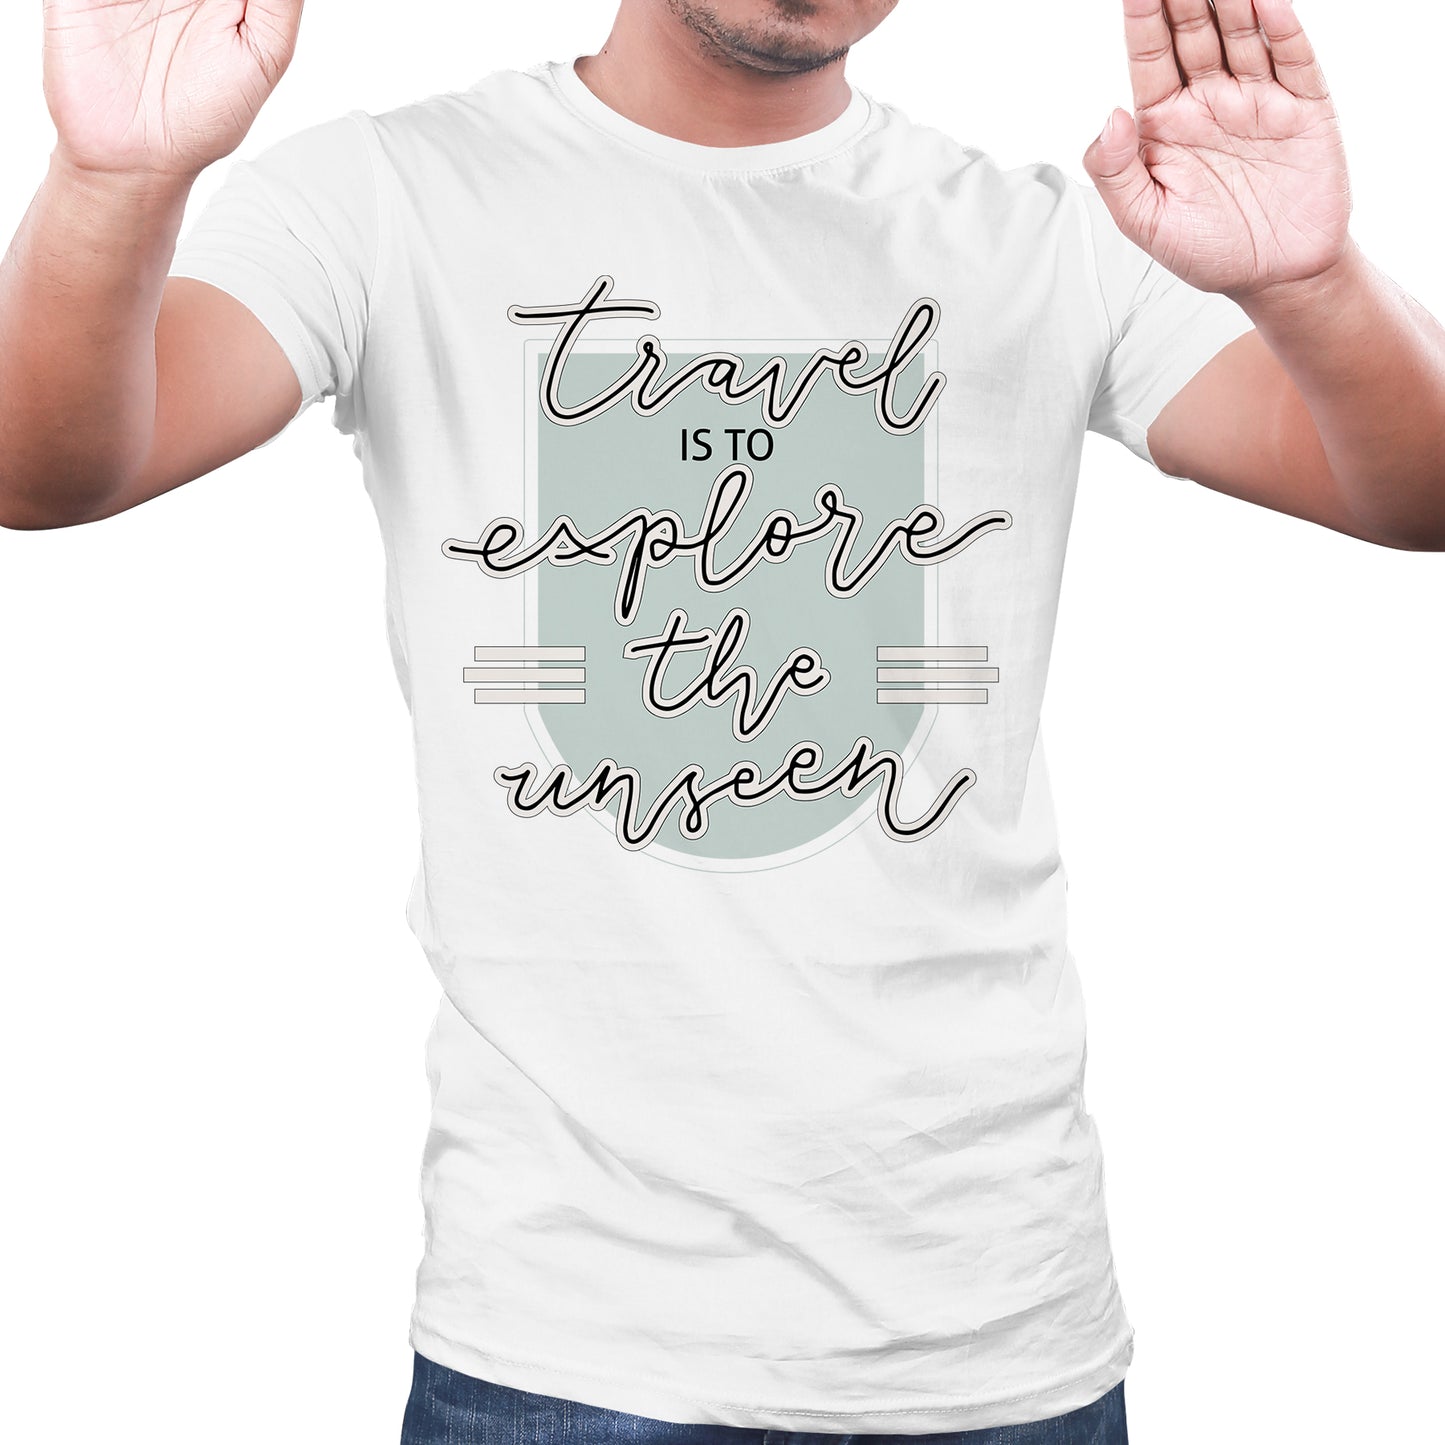 Travel the world & explore the unseen unisex t shirts - Black